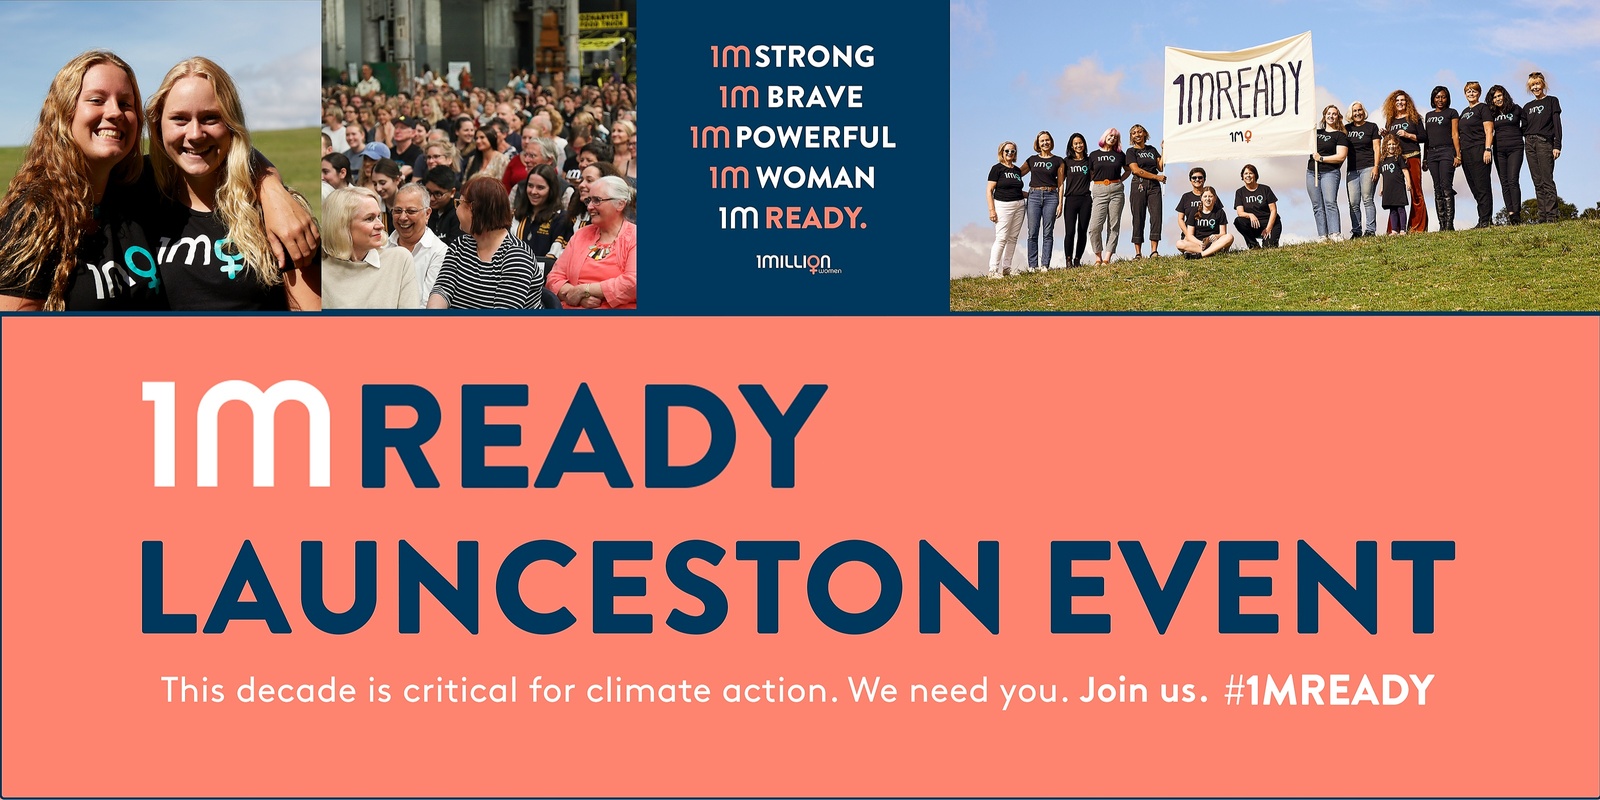 Banner image for '1MREADY LAUNCESTON' special event. Women are in a unique position to lead on climate action.